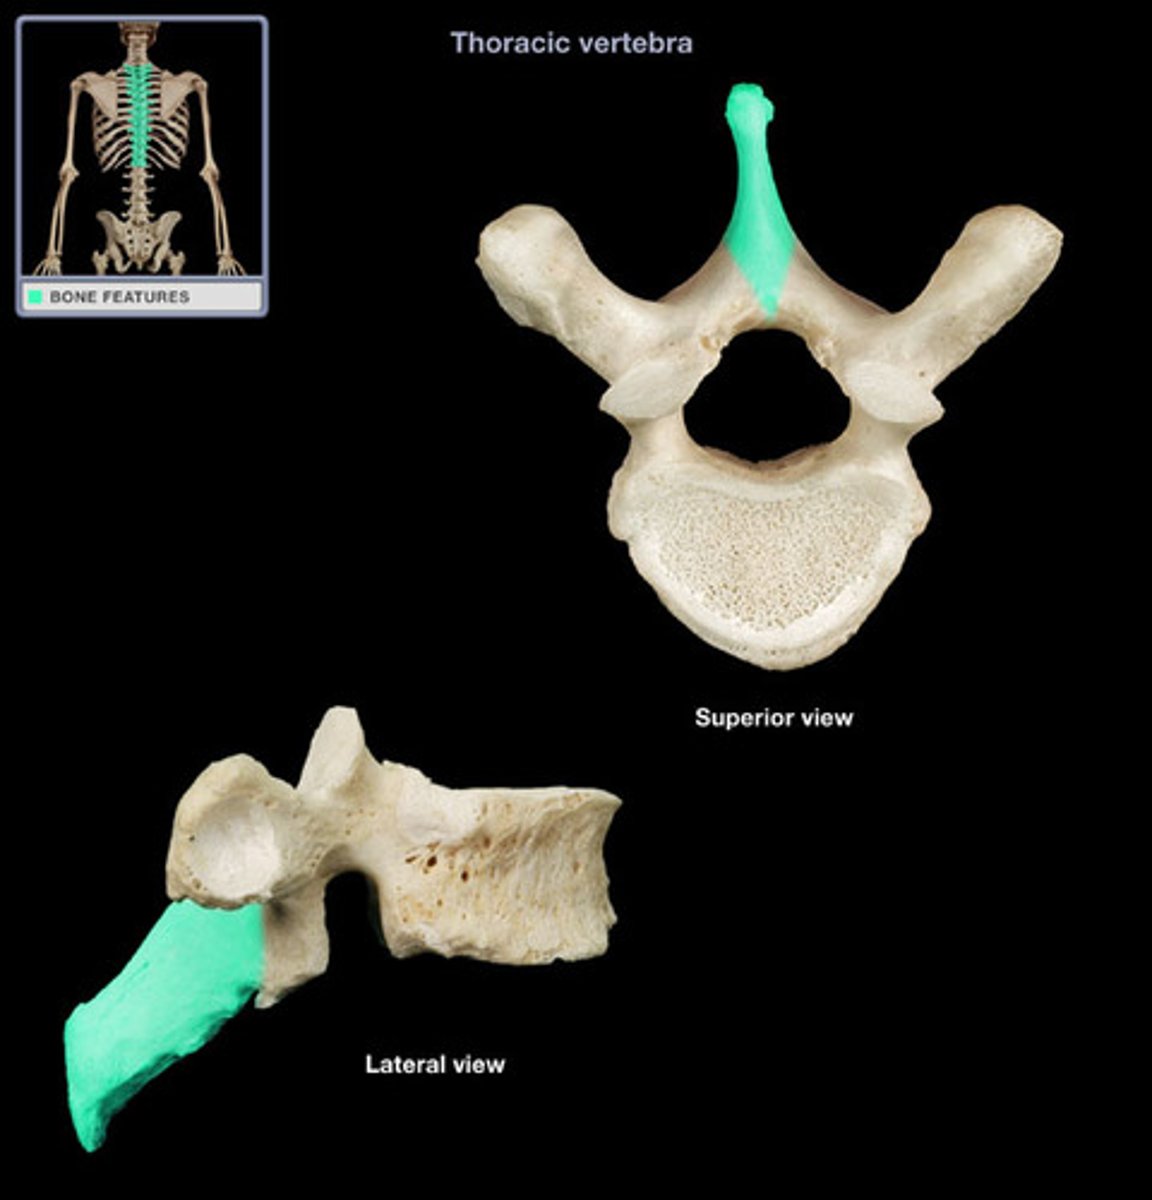 <p>The point that sticks out of the vertebra</p>